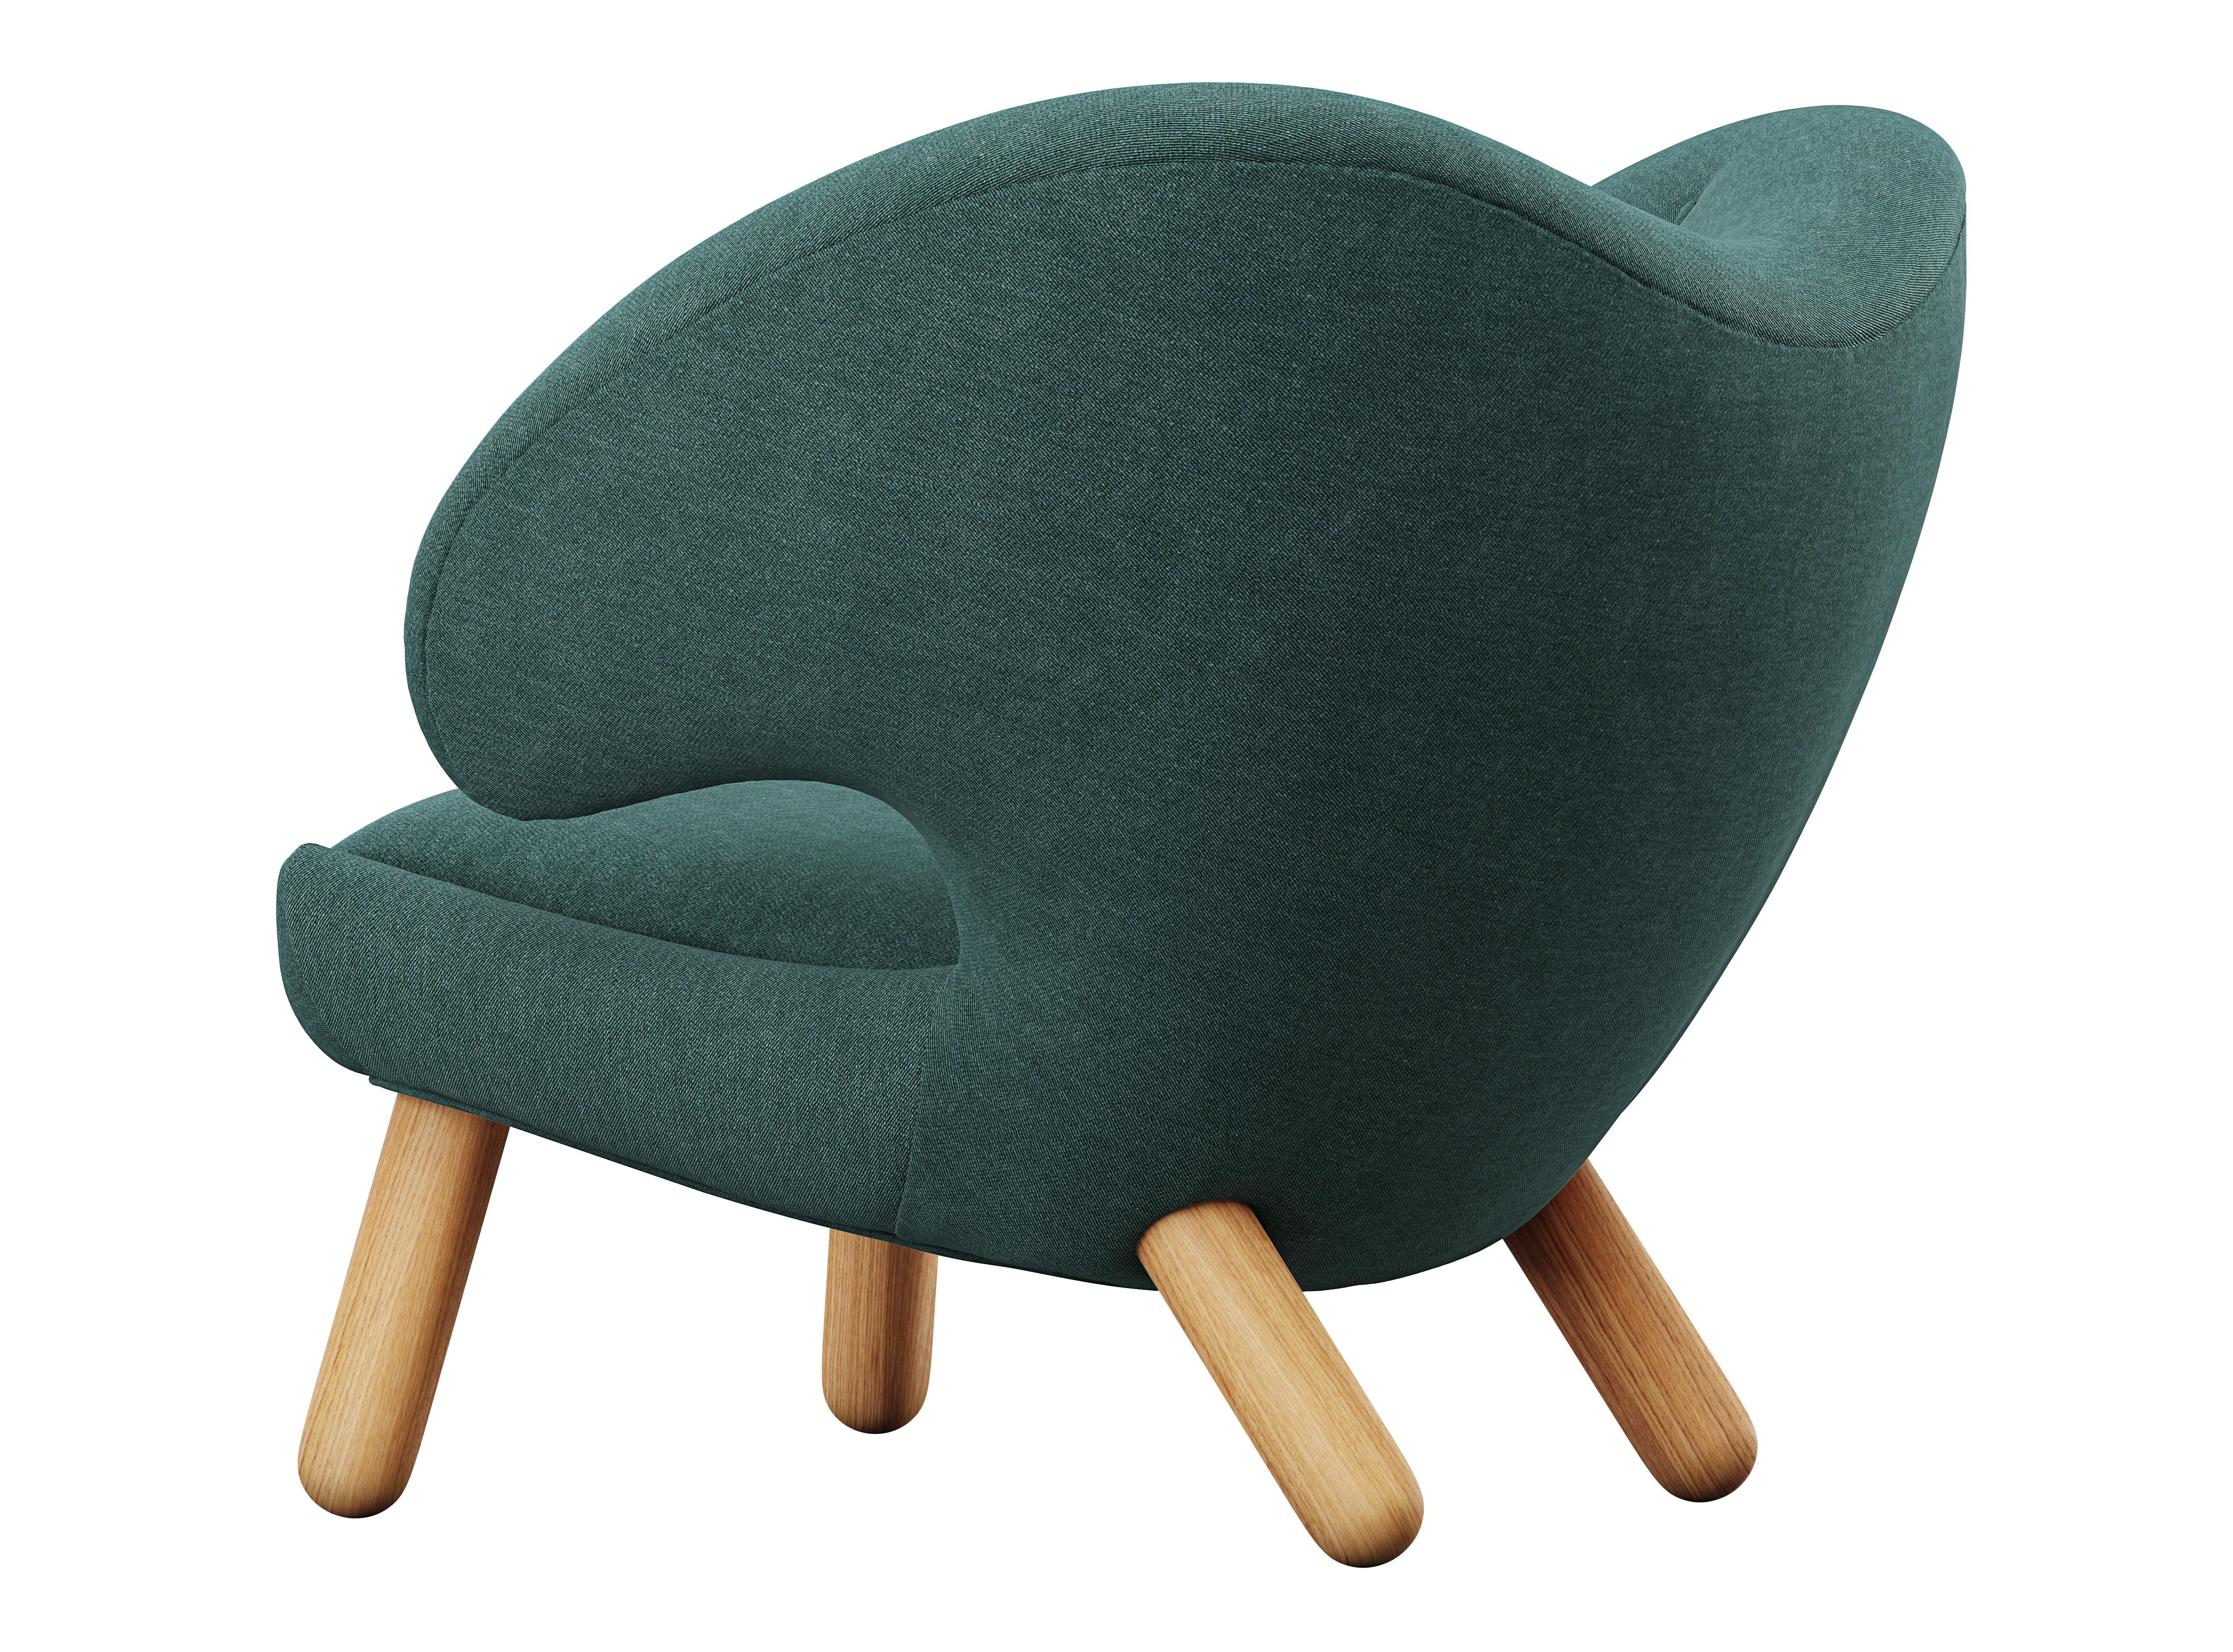 Modern Set of Two Finn Juhl Pelican Chairs Upholstered in Wood and Fabric